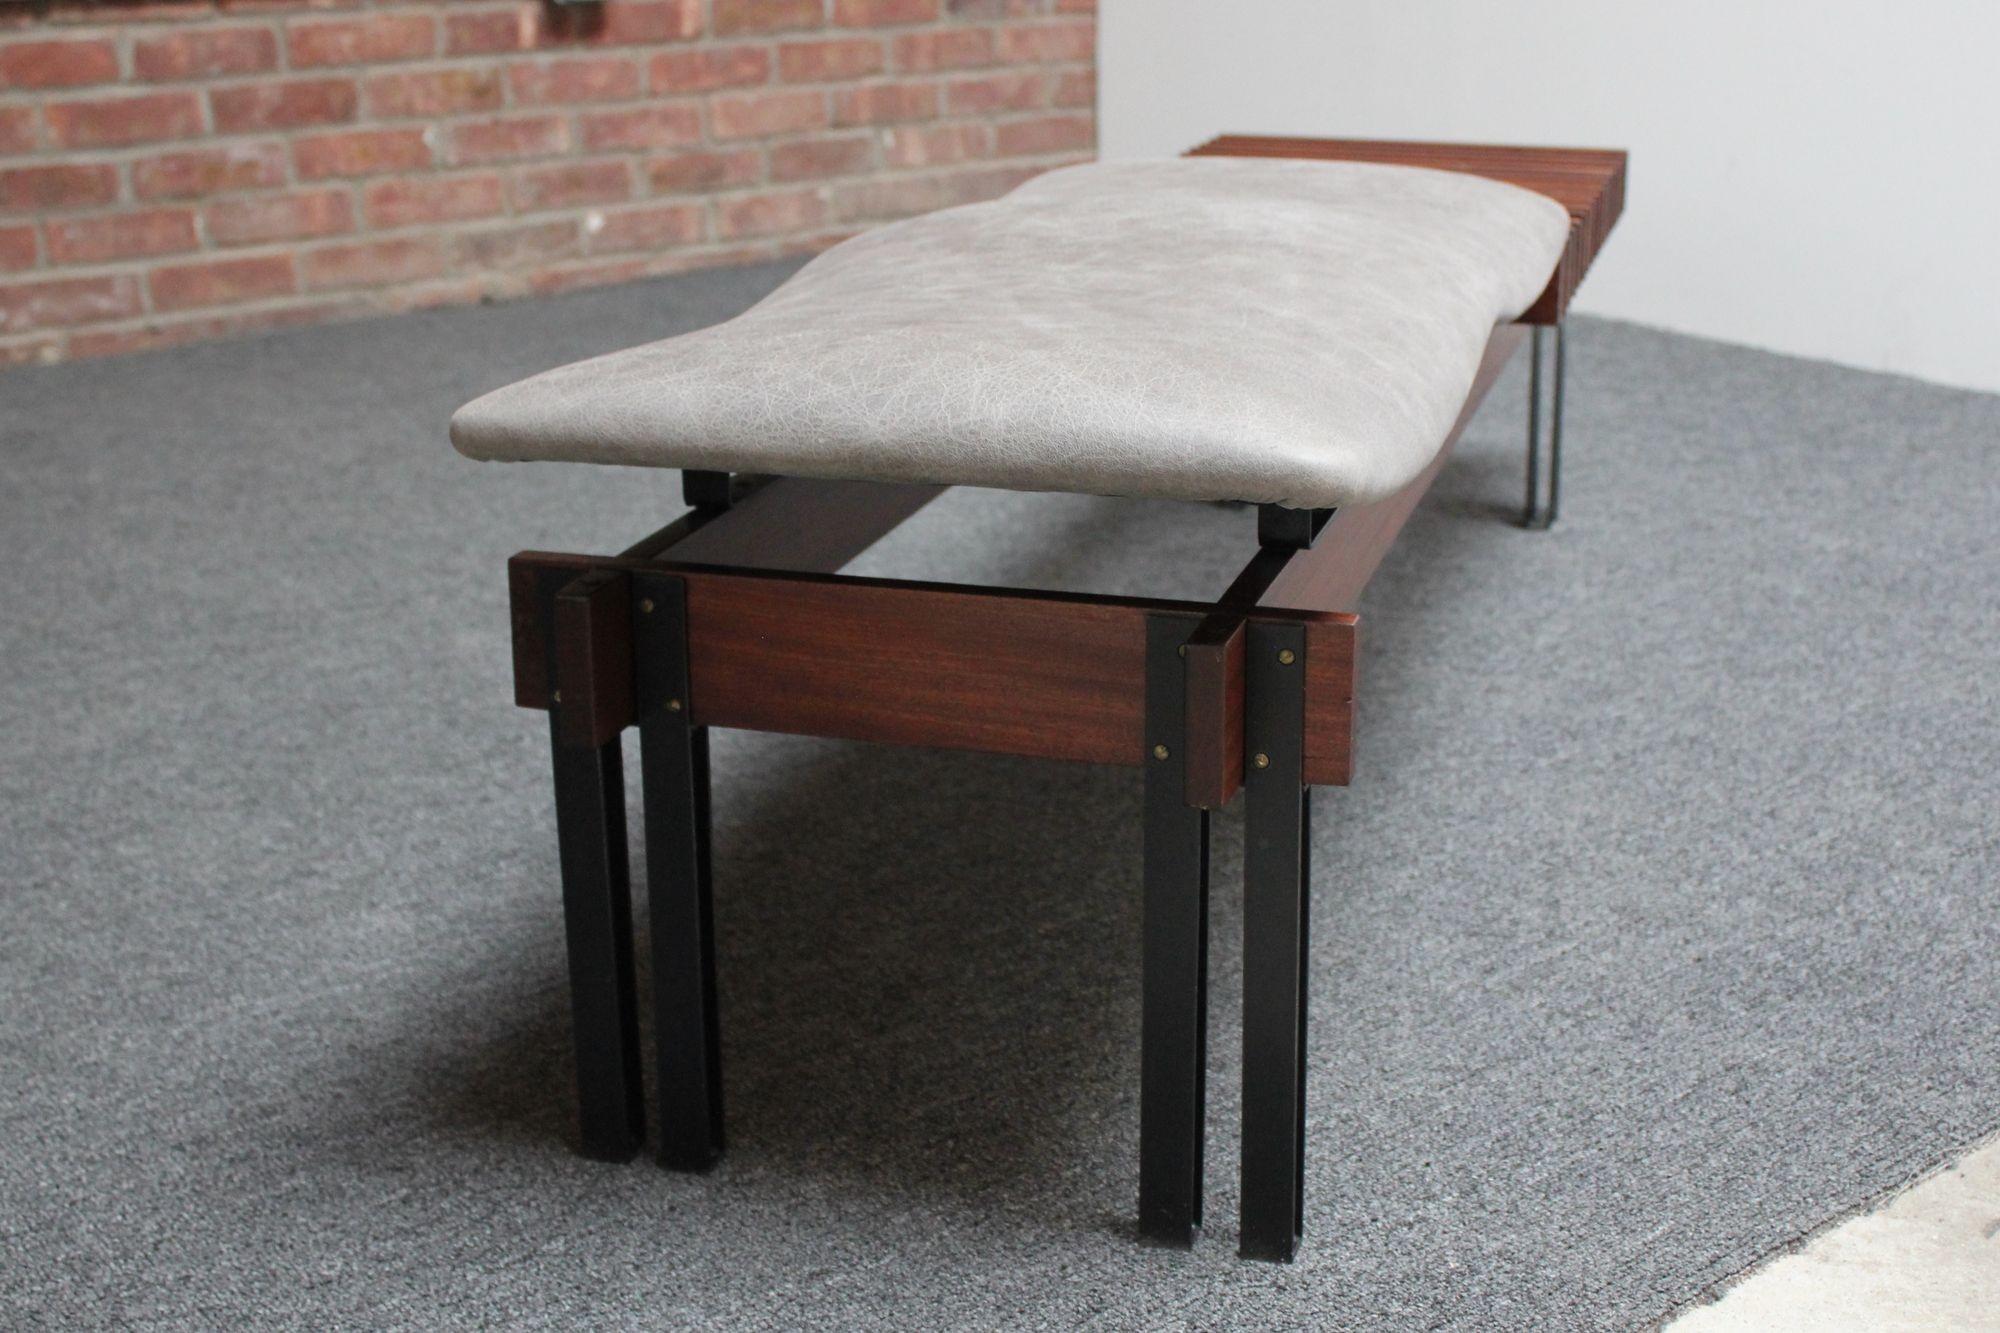 Mid-20th Century Italian Modernist Teak and Leather Bench by Inge and Luciano Rubino For Sale